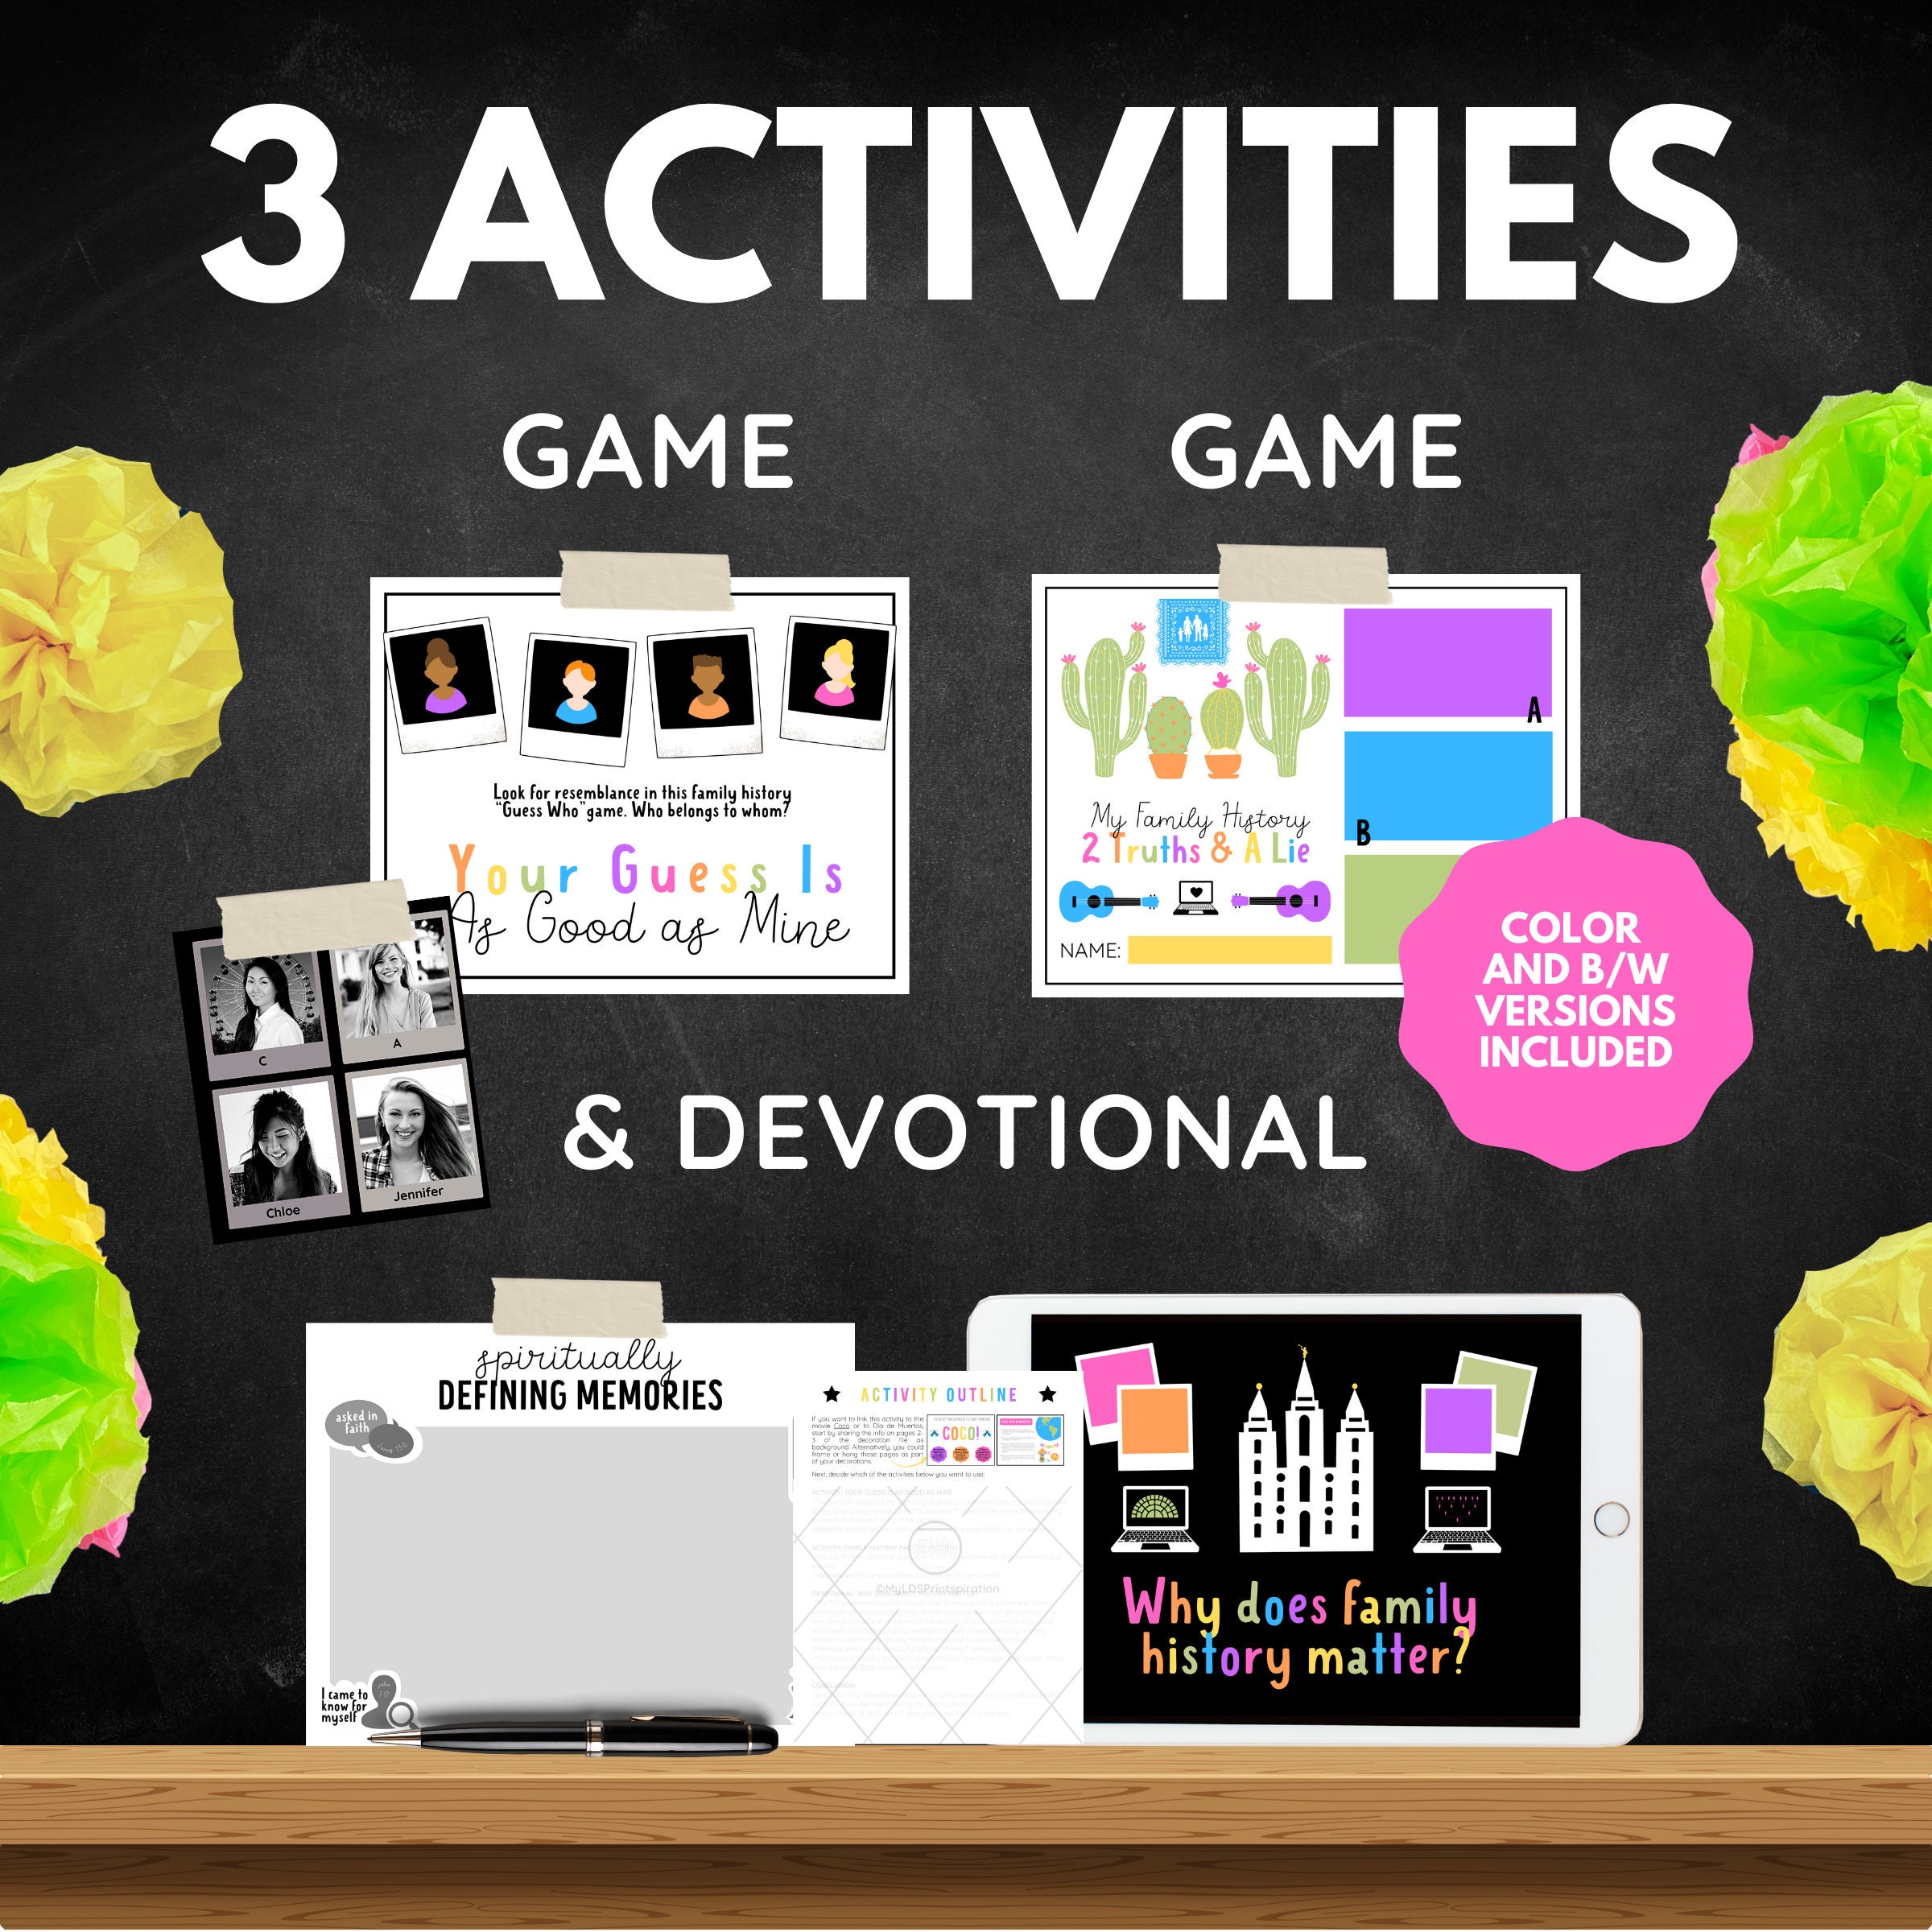 RELIEF SOCIETY Activity Game Activity Printable Get to Know -  Sweden